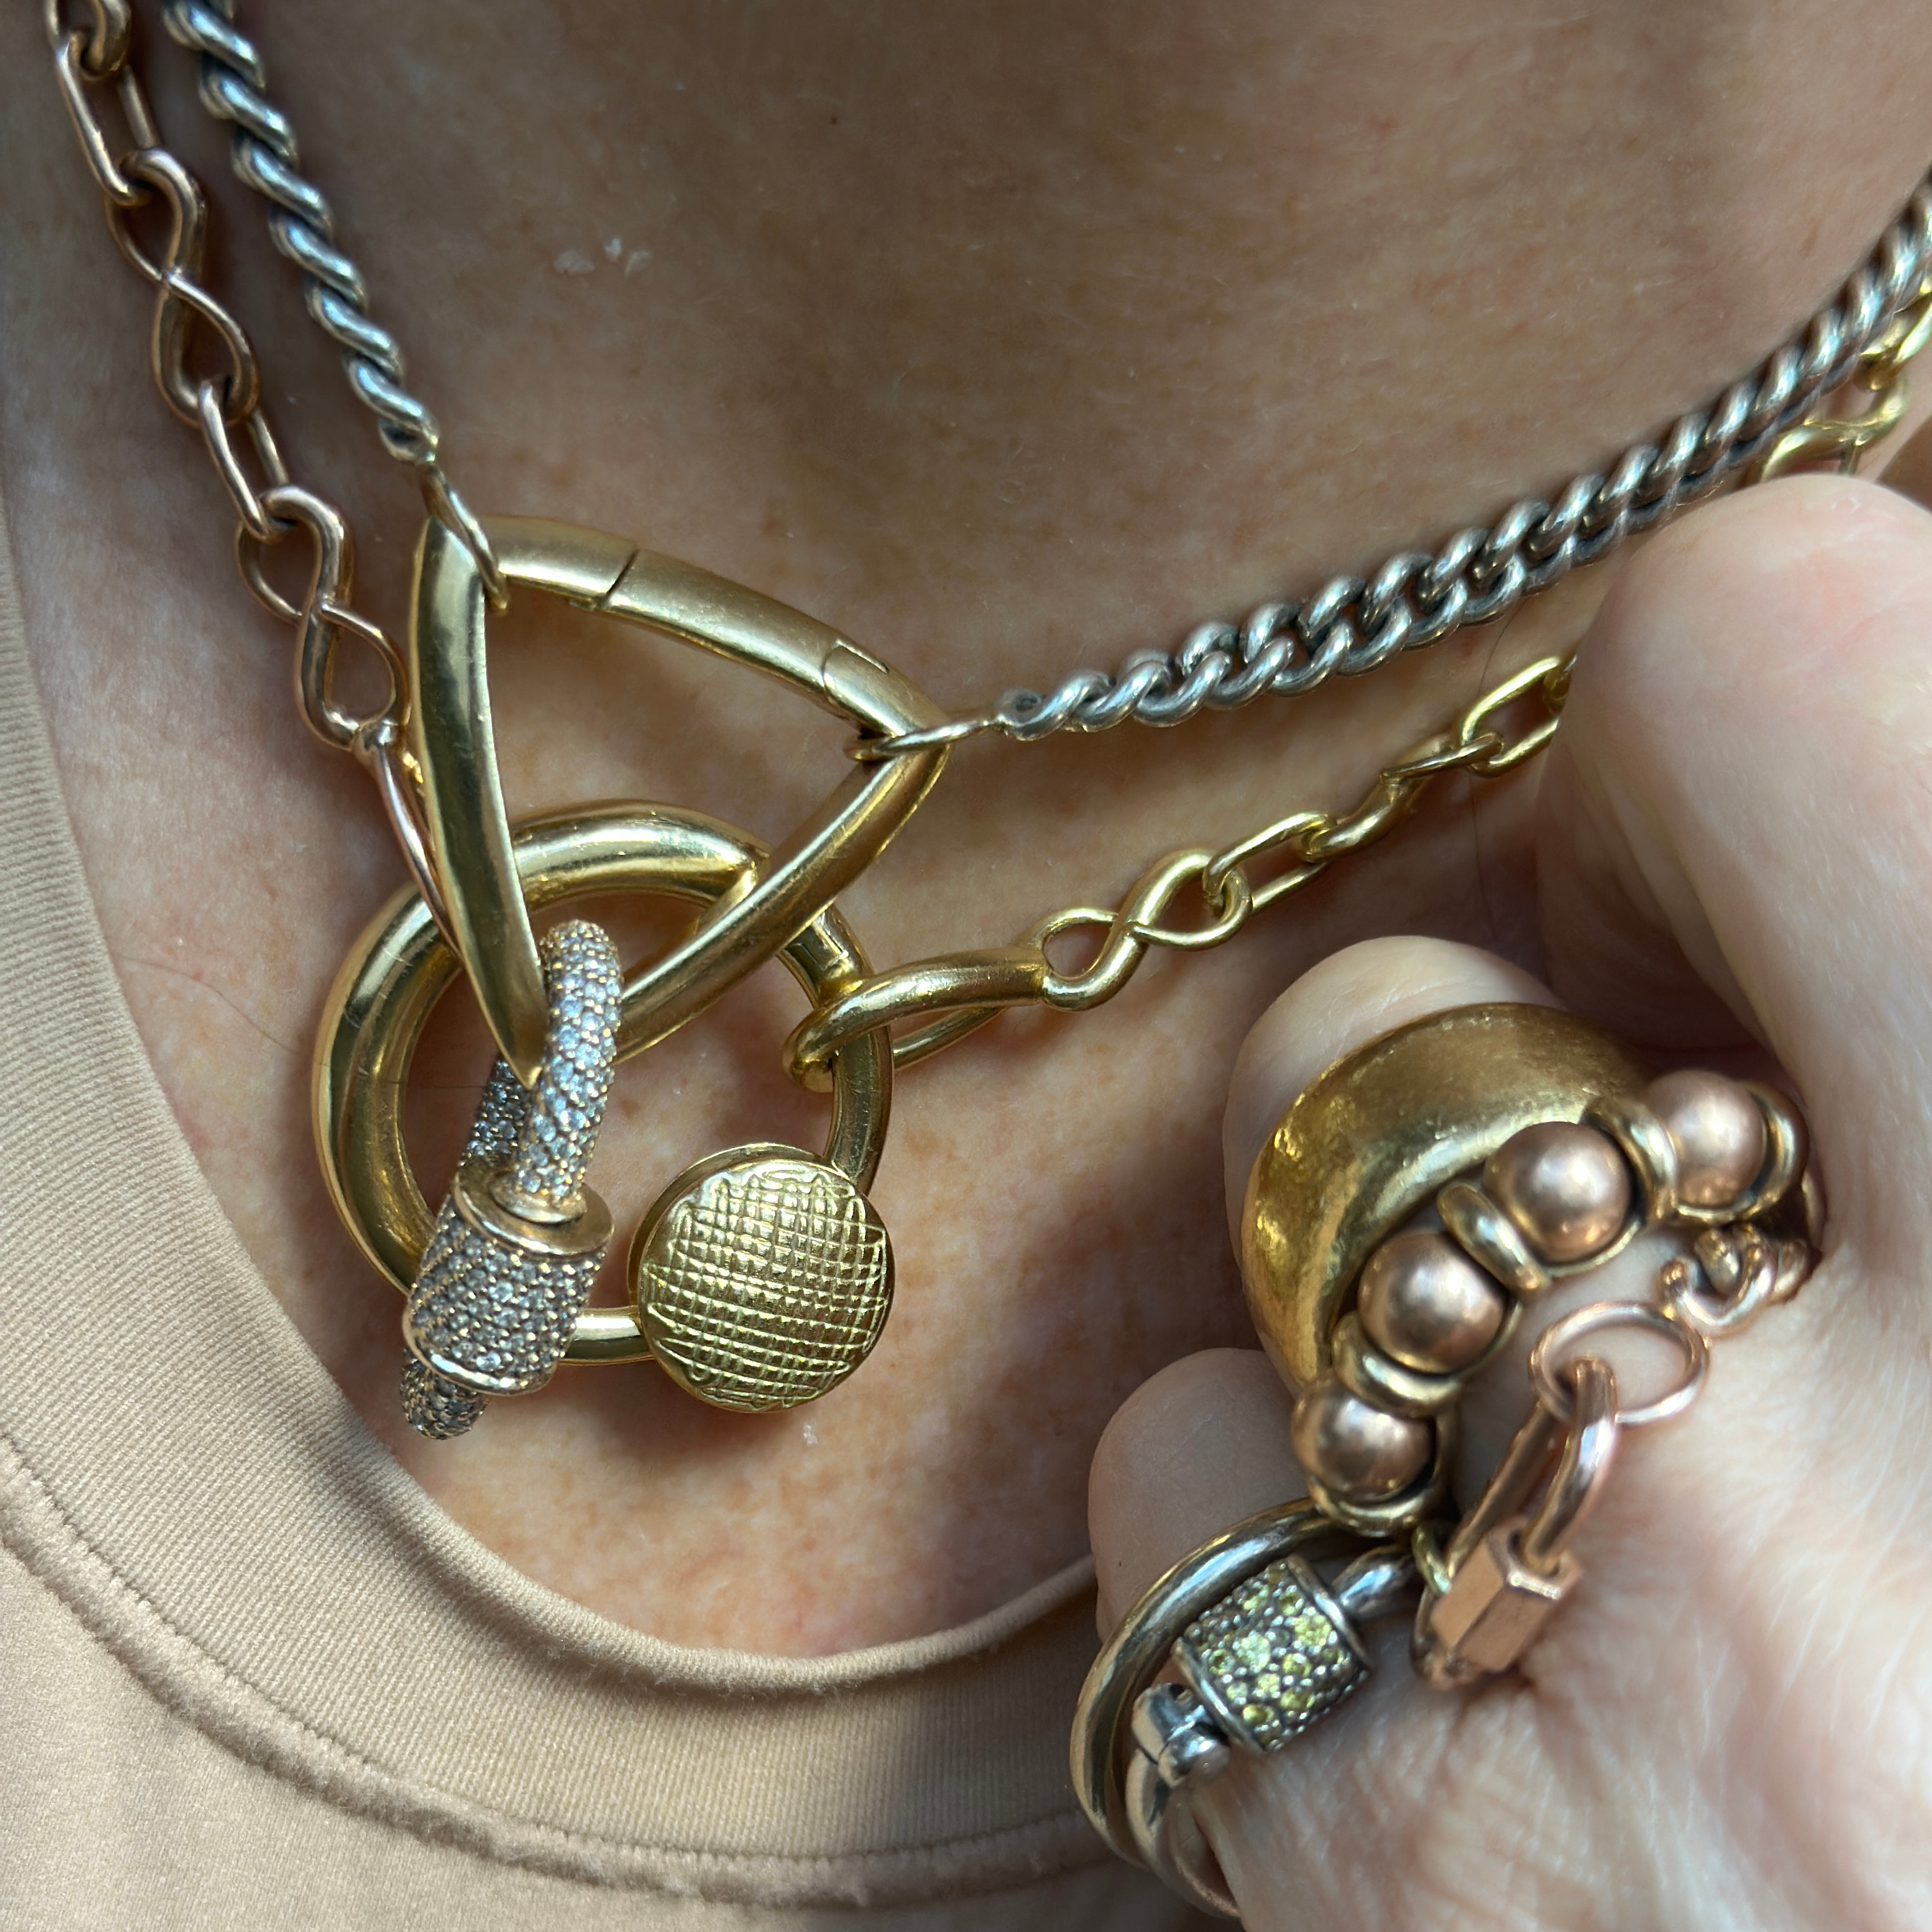 Close up of woman's decolletage wearing necklace with gold disc charm